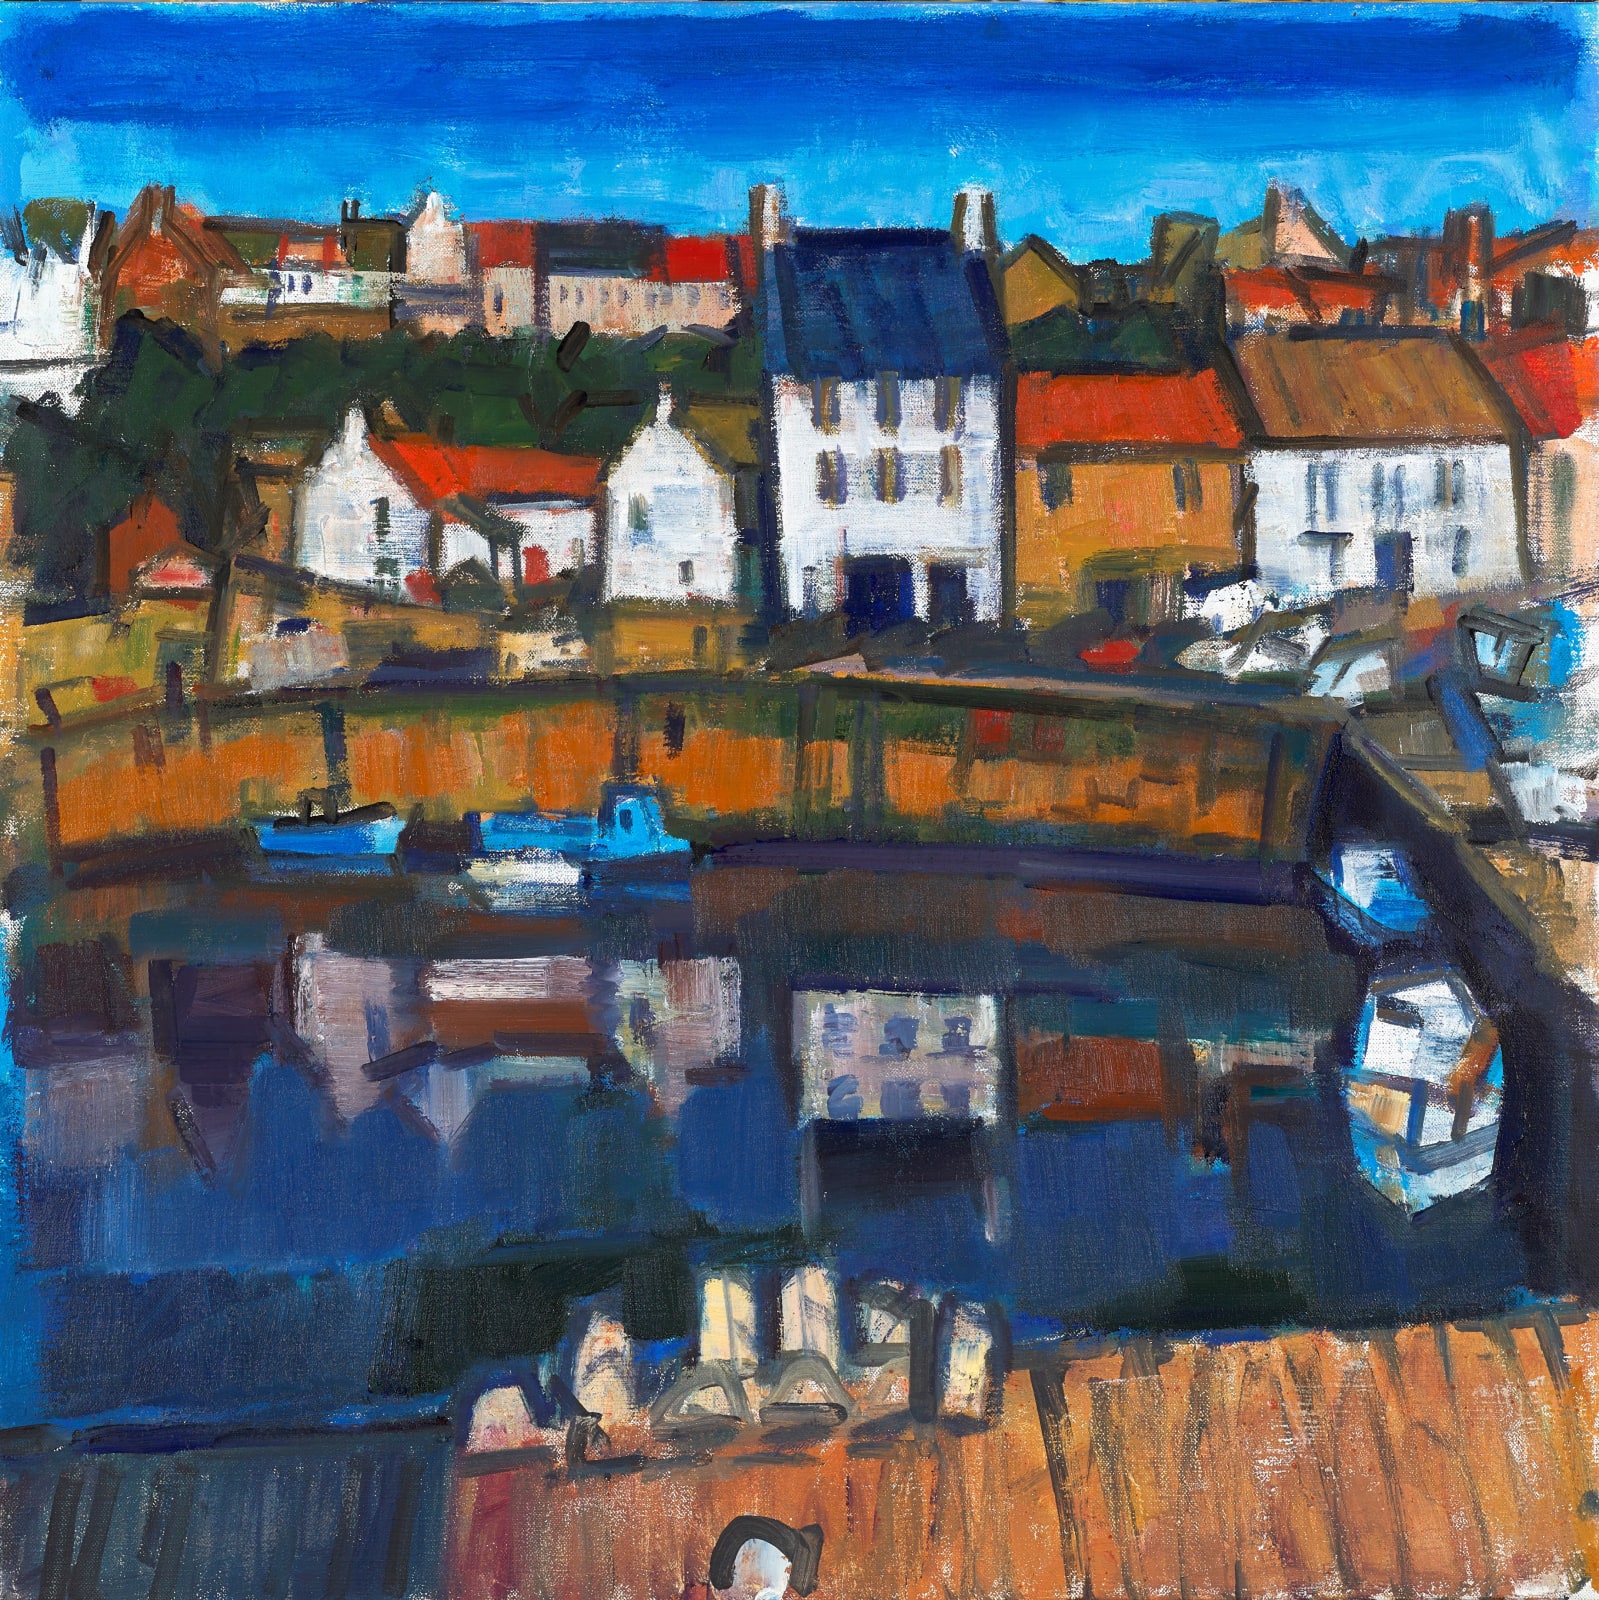 Archie Forrest, Crail - tide in, Fife, 2022